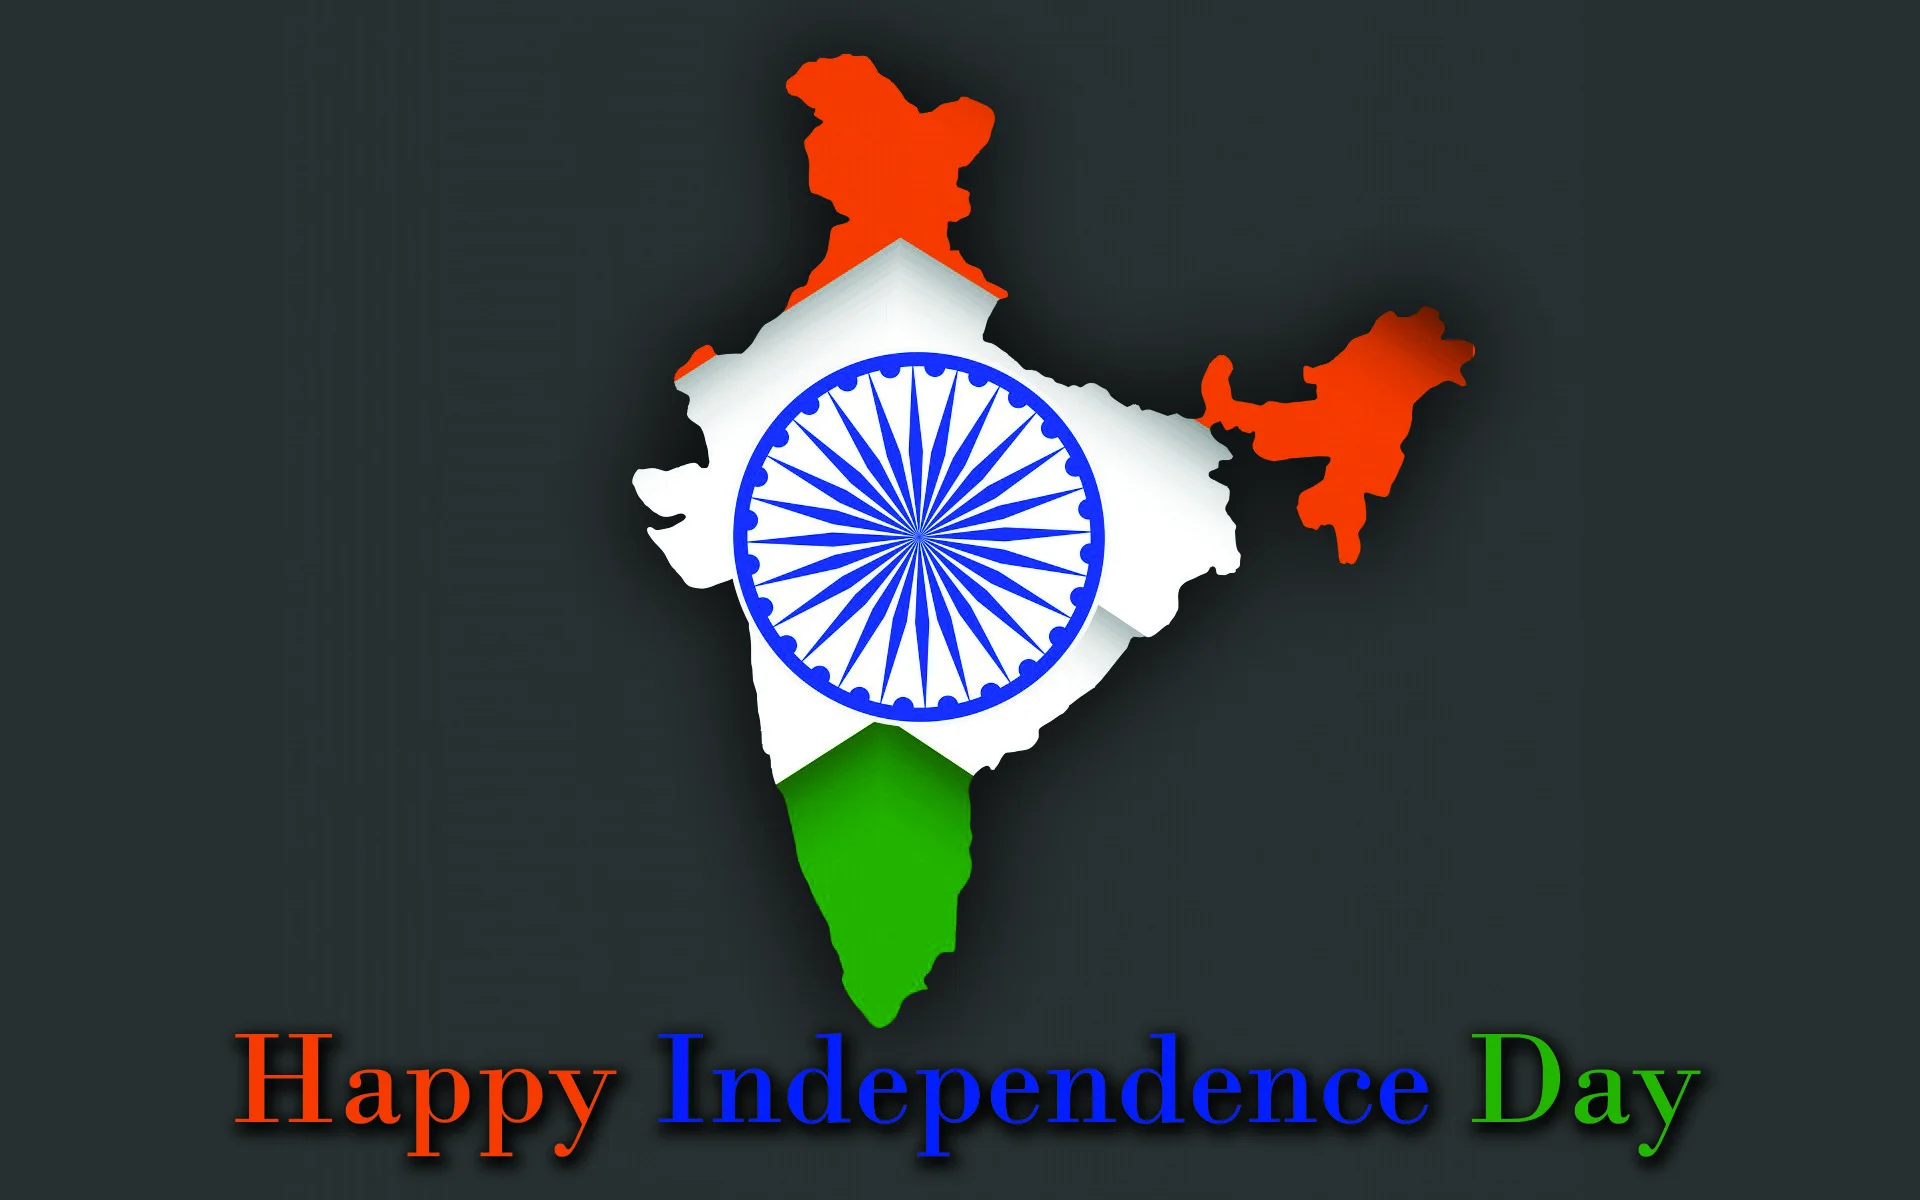 Happy independence day greetings hd wallpapers Free wallpapers